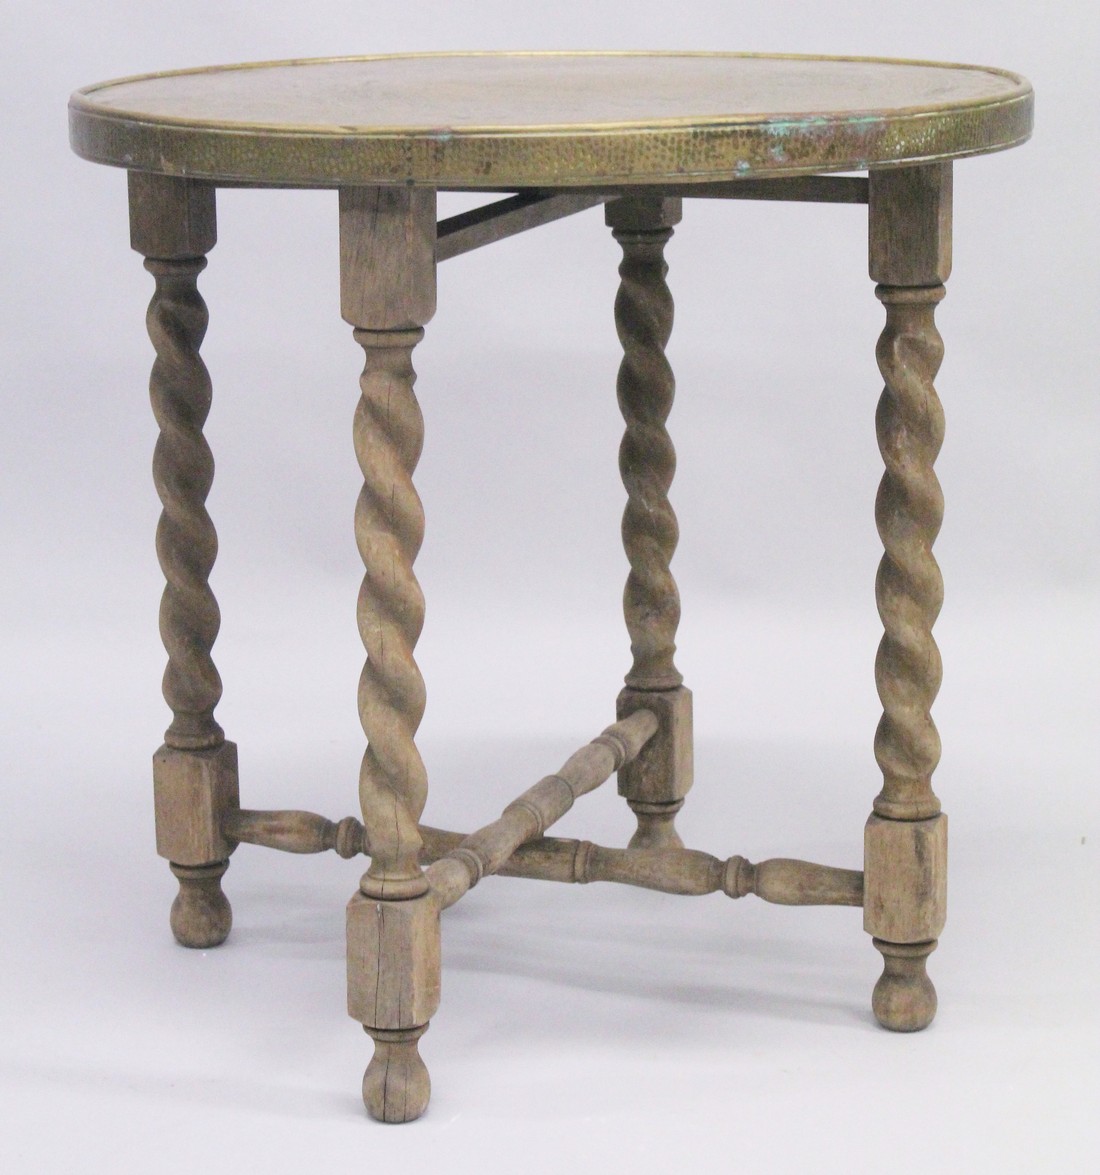 A FINE 19TH CENTURY MAMLUK REVIVAL BRASS TABLE, with folding wooden 'X' form legs, engraved with - Image 4 of 5